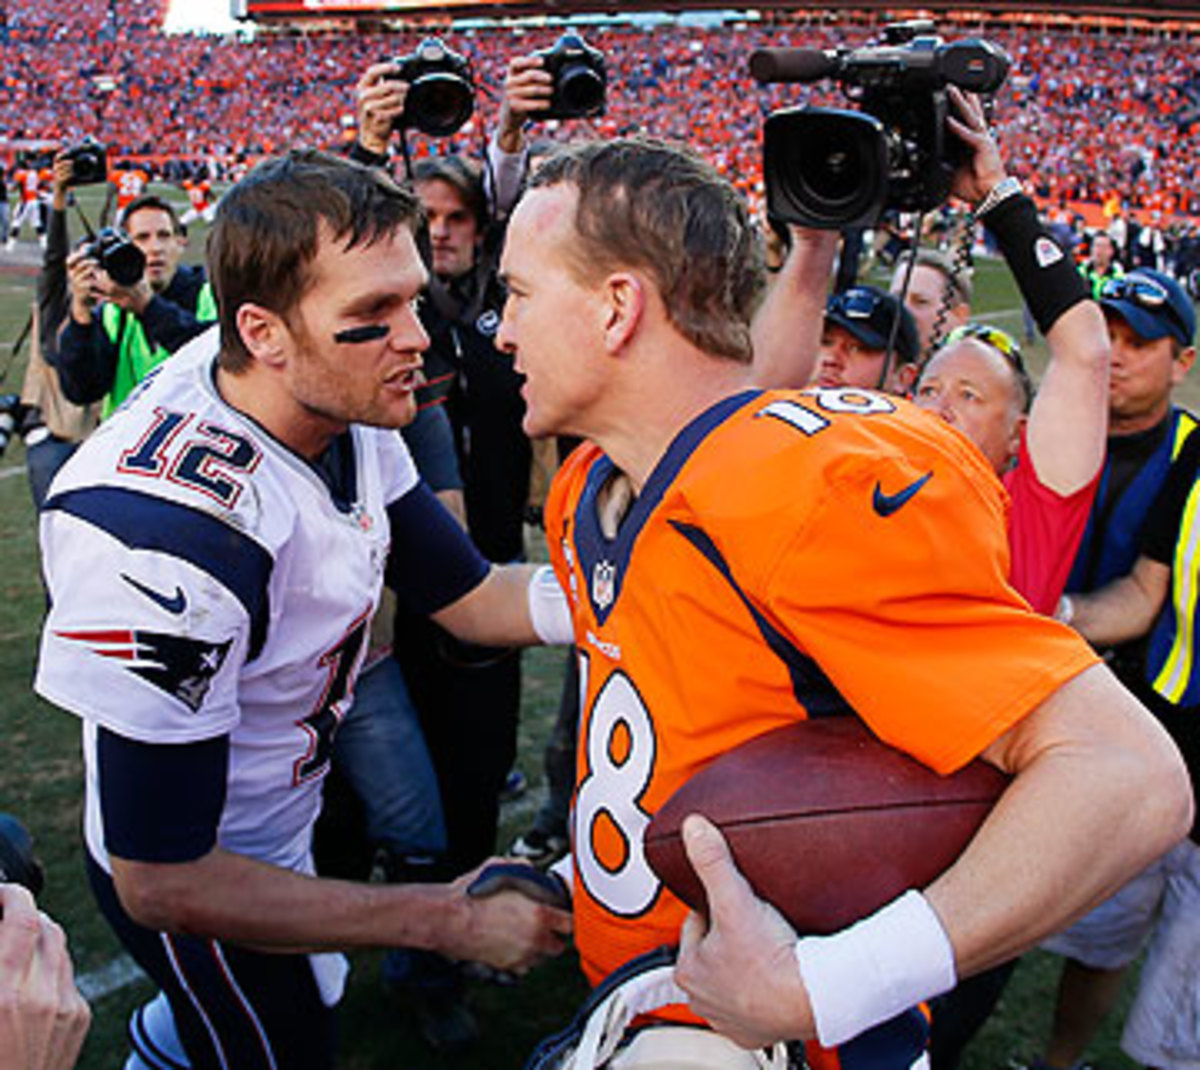 Peyton Manning's Broncos got the best of Brady's Patriots in the AFC title game. (Kevin C. Cox/Getty Images)